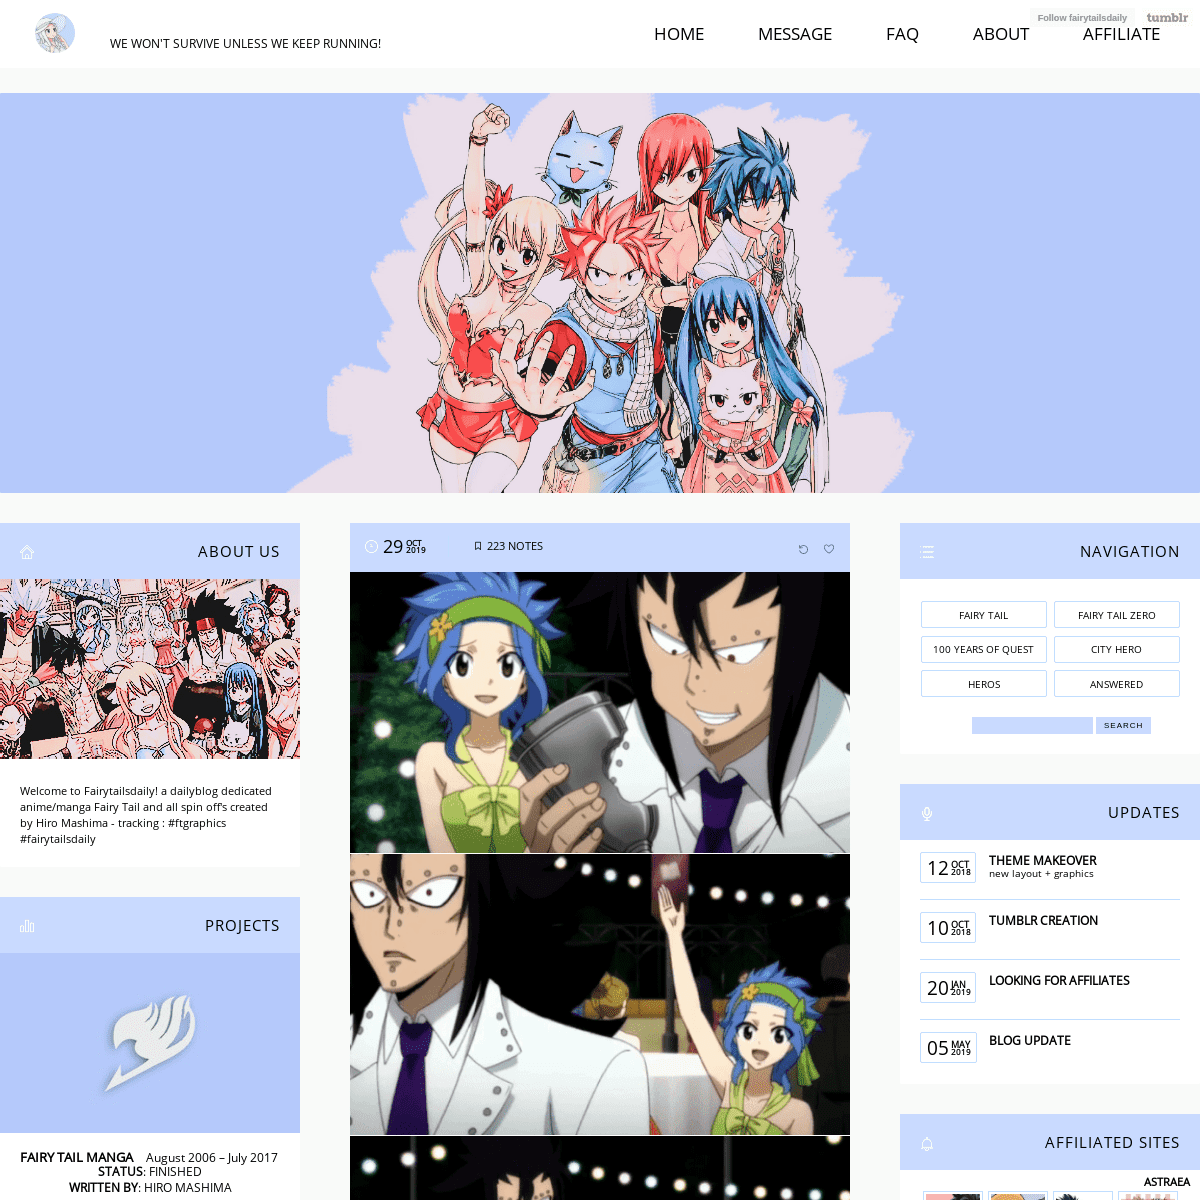 A complete backup of fairytailsdaily.tumblr.com